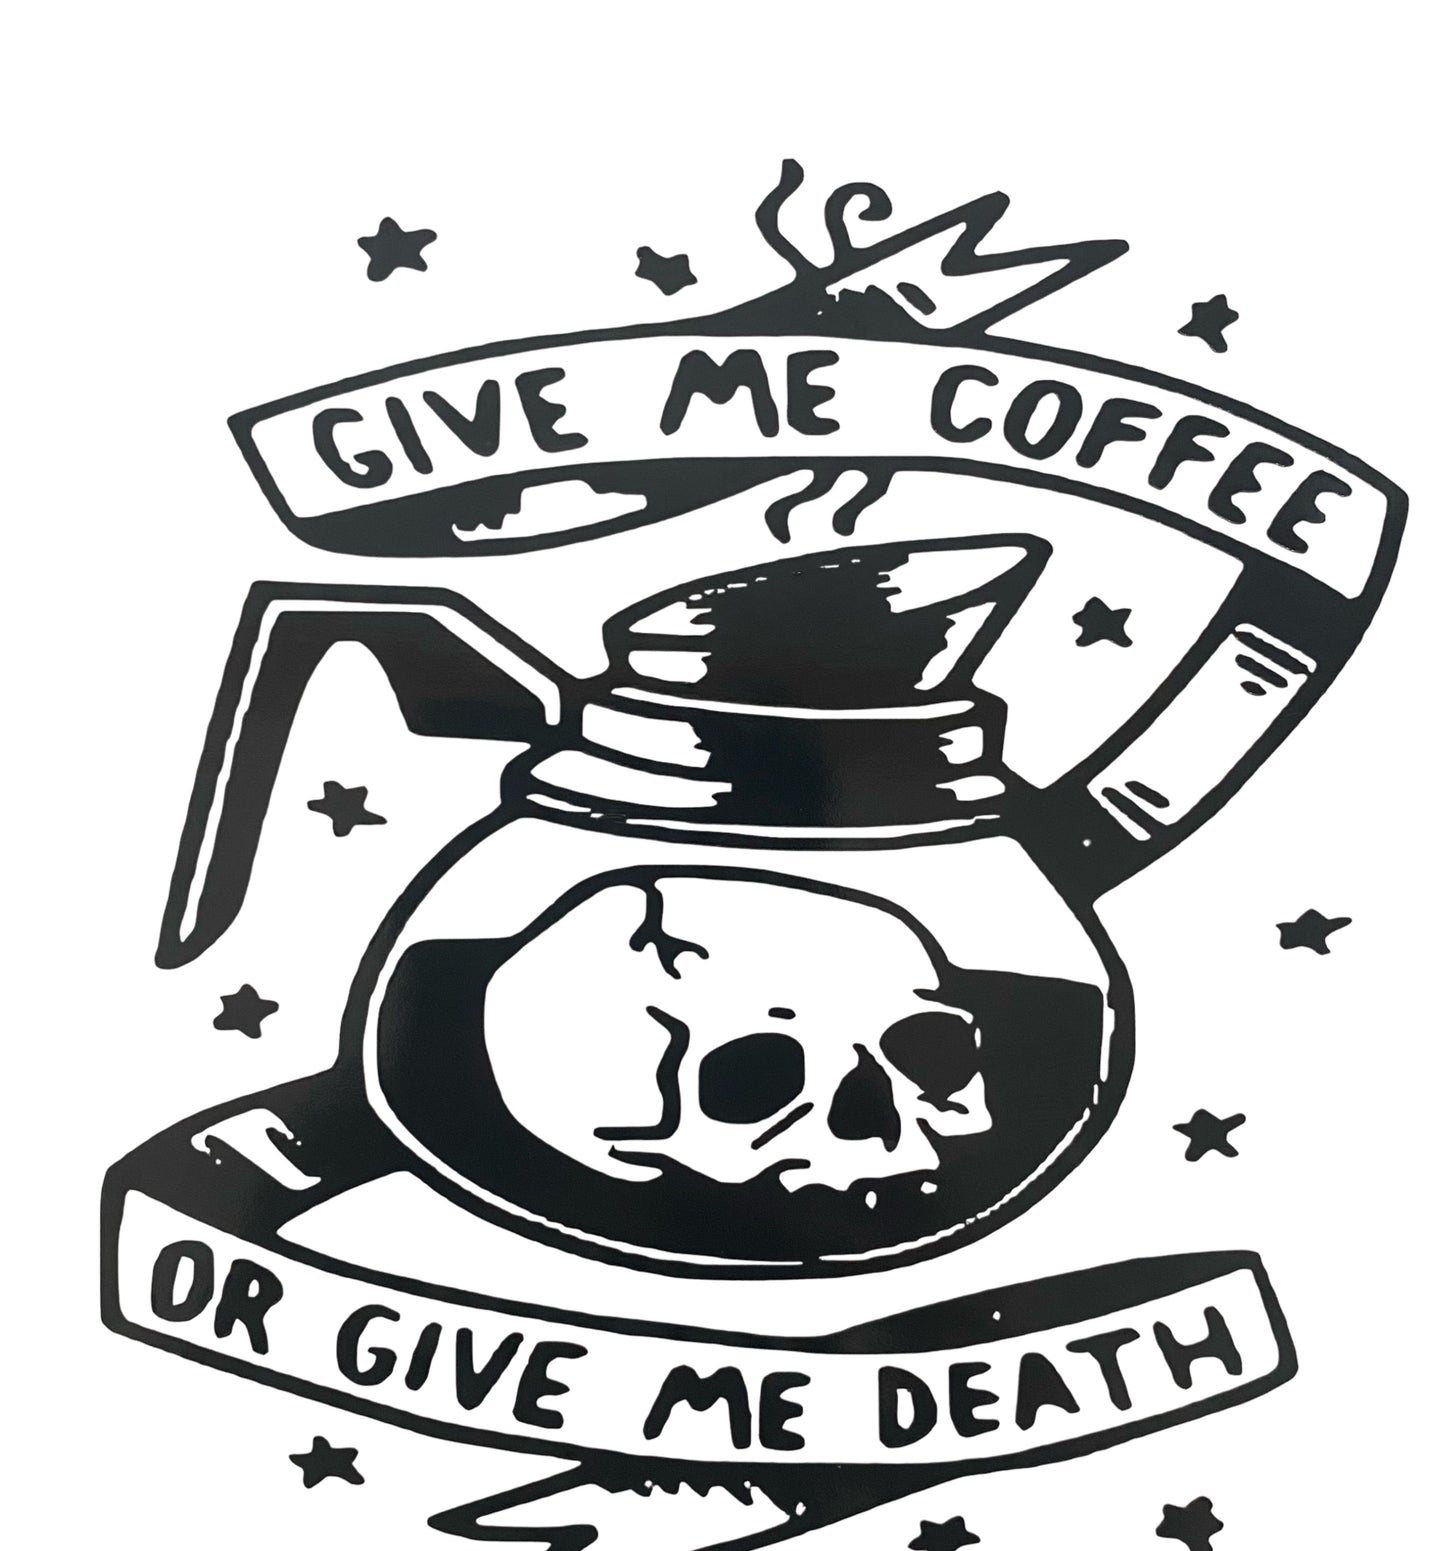 Give Me Coffee Or Give Me Death Custom Vinyl Decal  Material: Oracle 651 permanent vinyl 